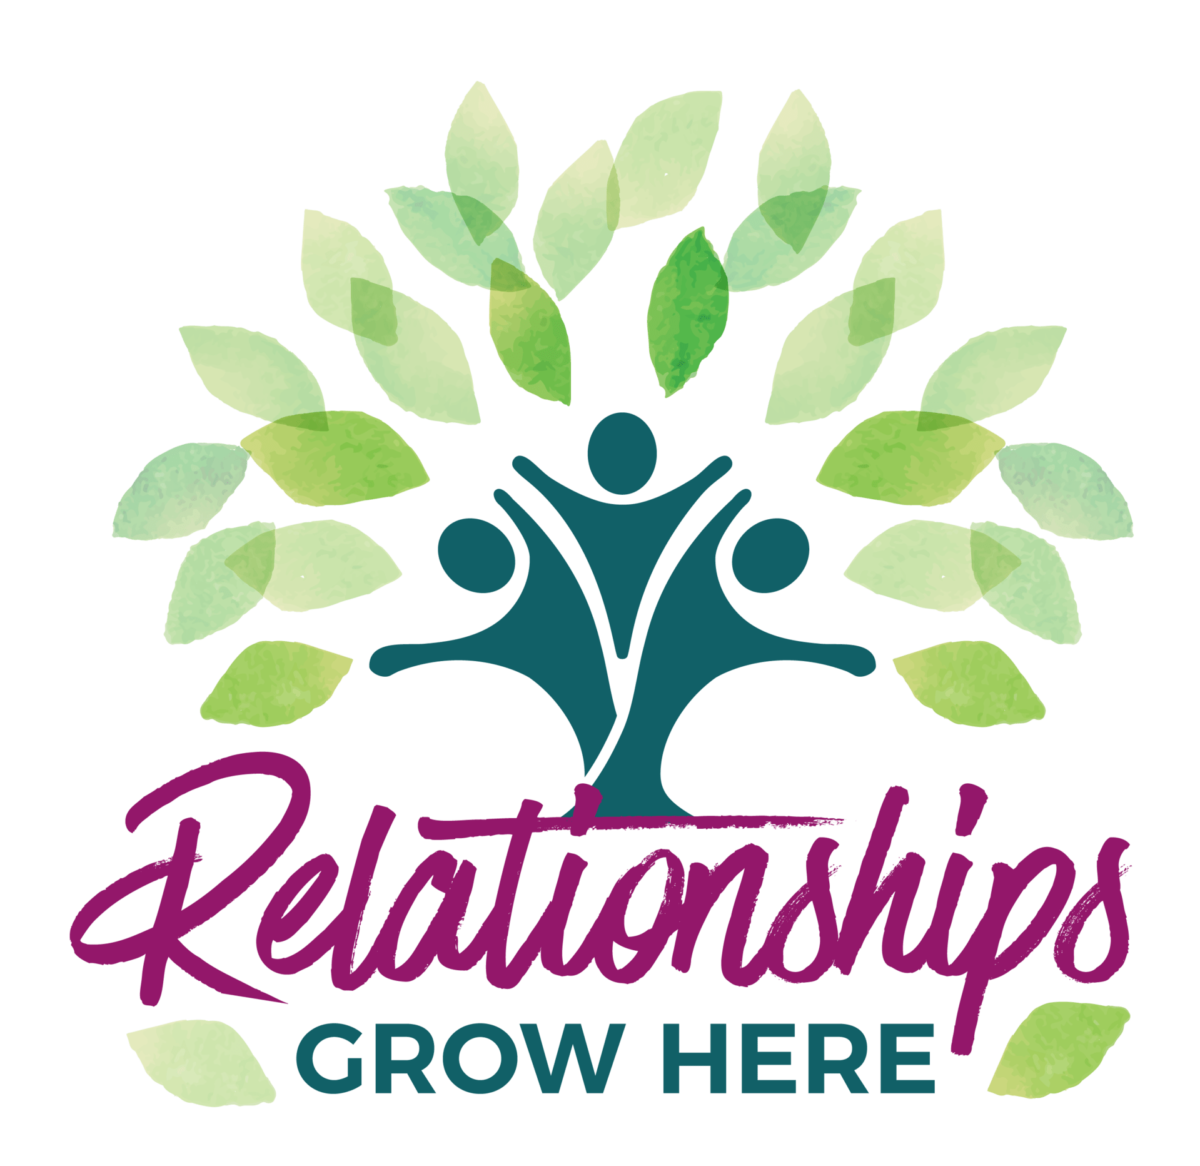 relationships_grow_here logo-01